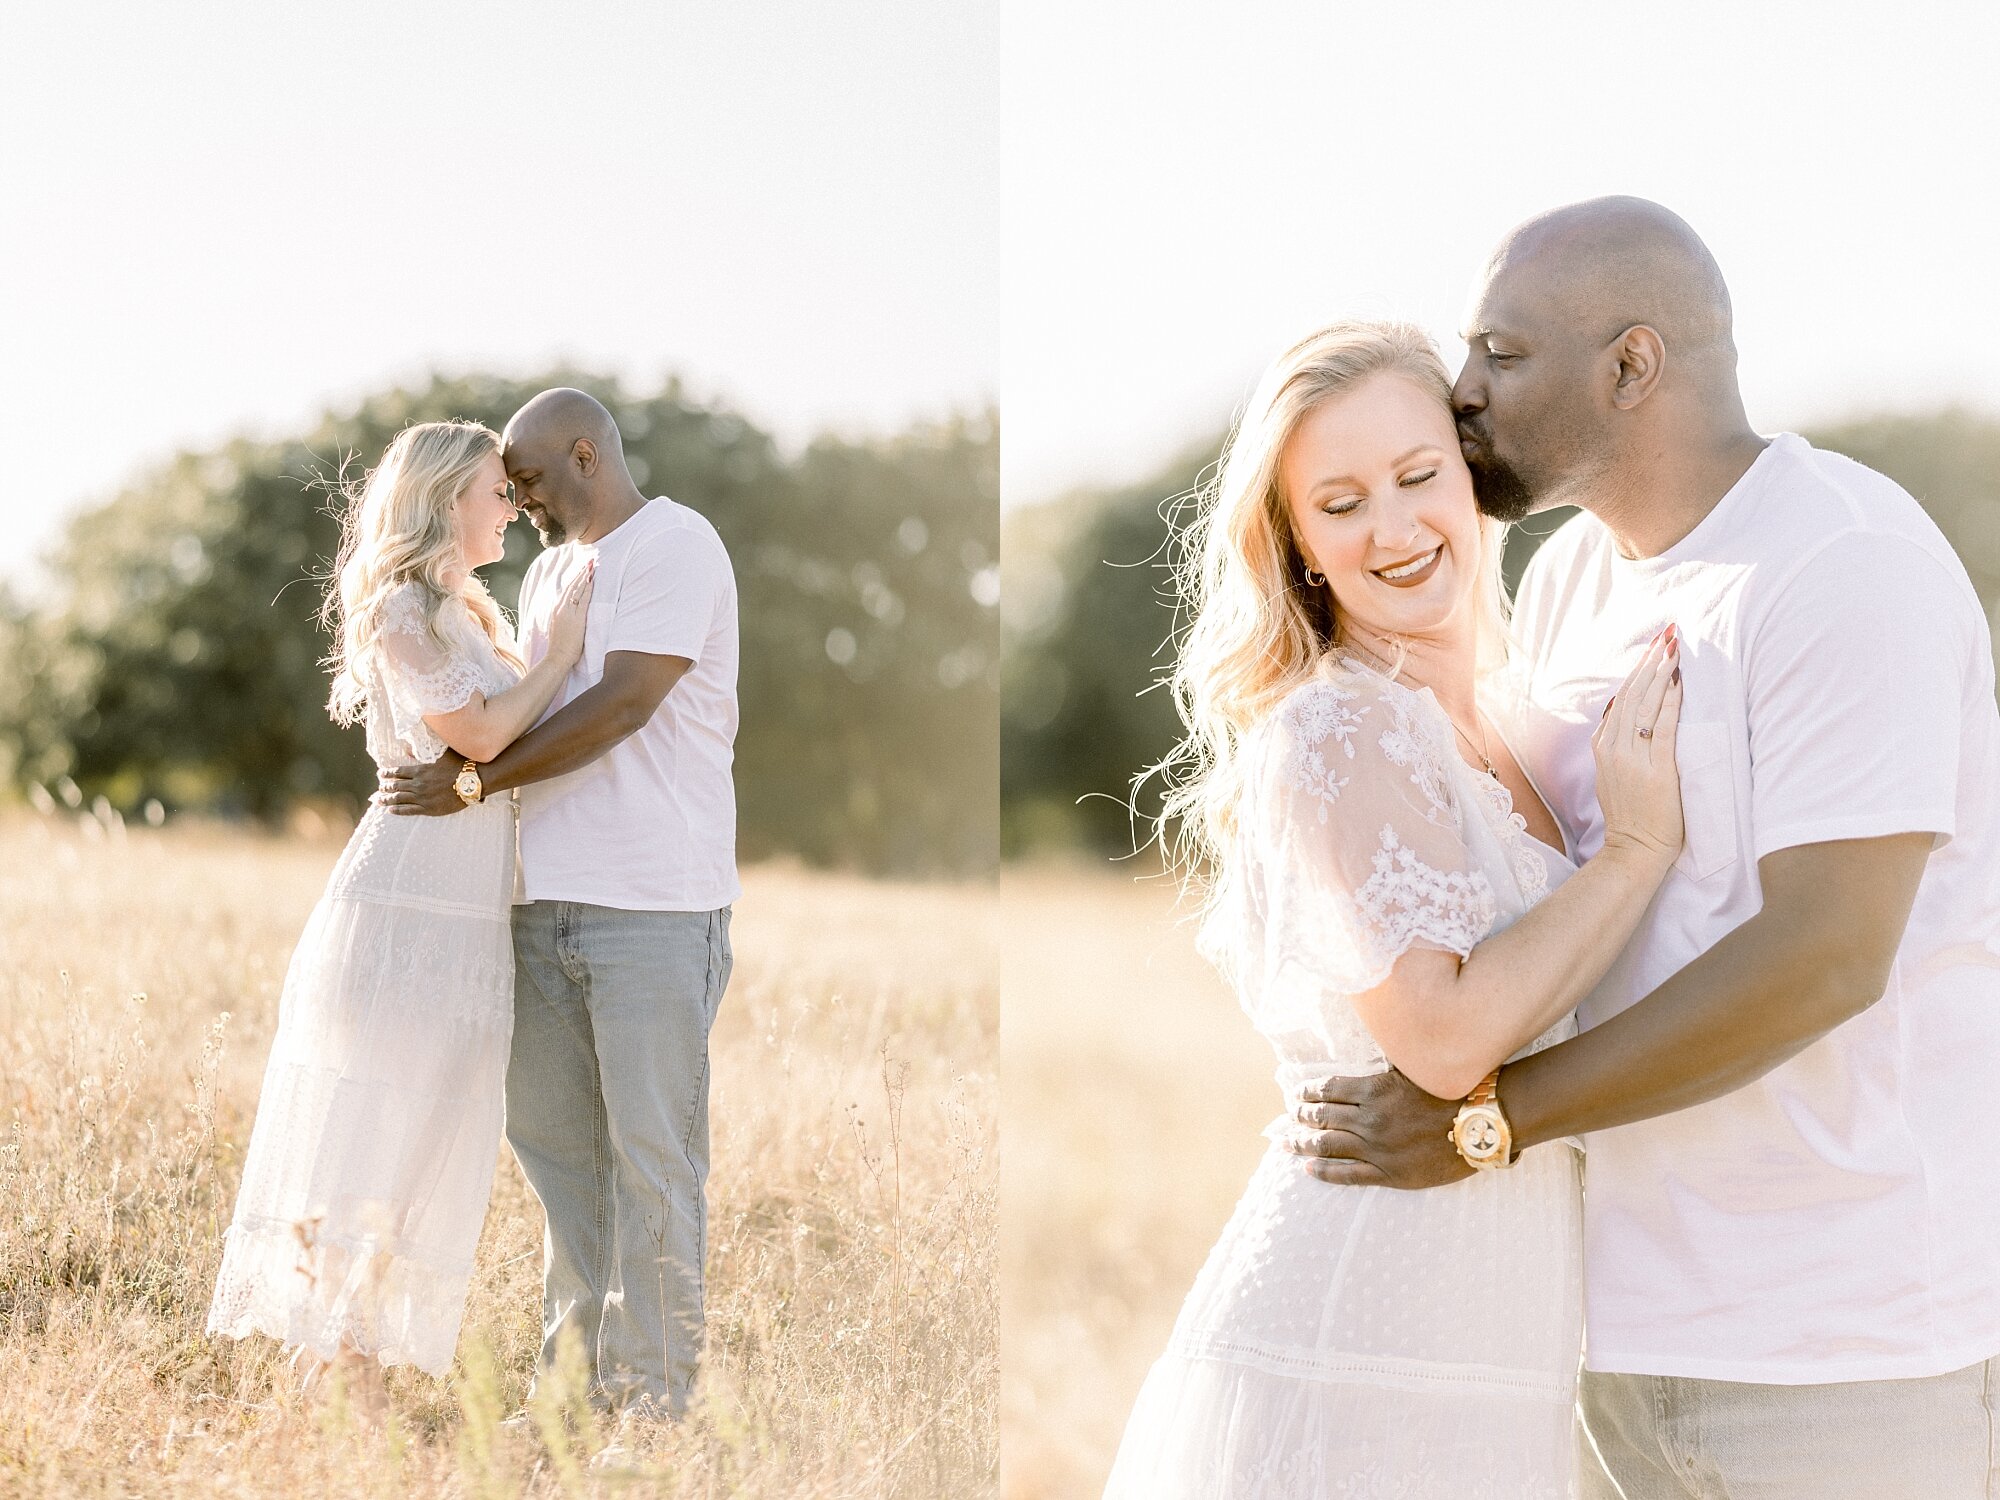 outdoor engagement photo shoot in Dallas area